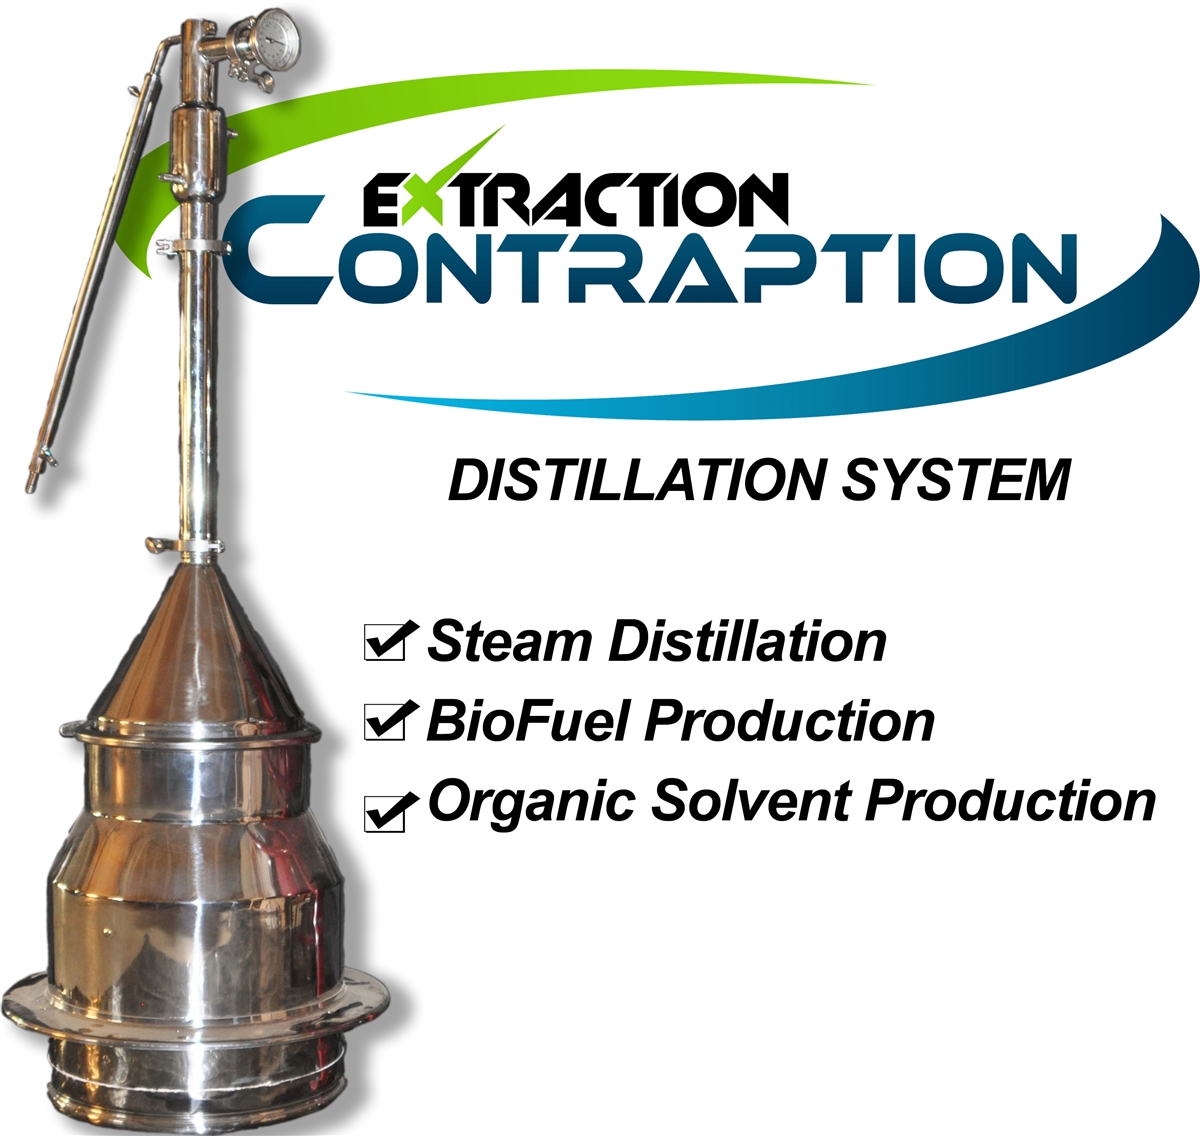 Extraction Contraption Pro System Distillation Unit